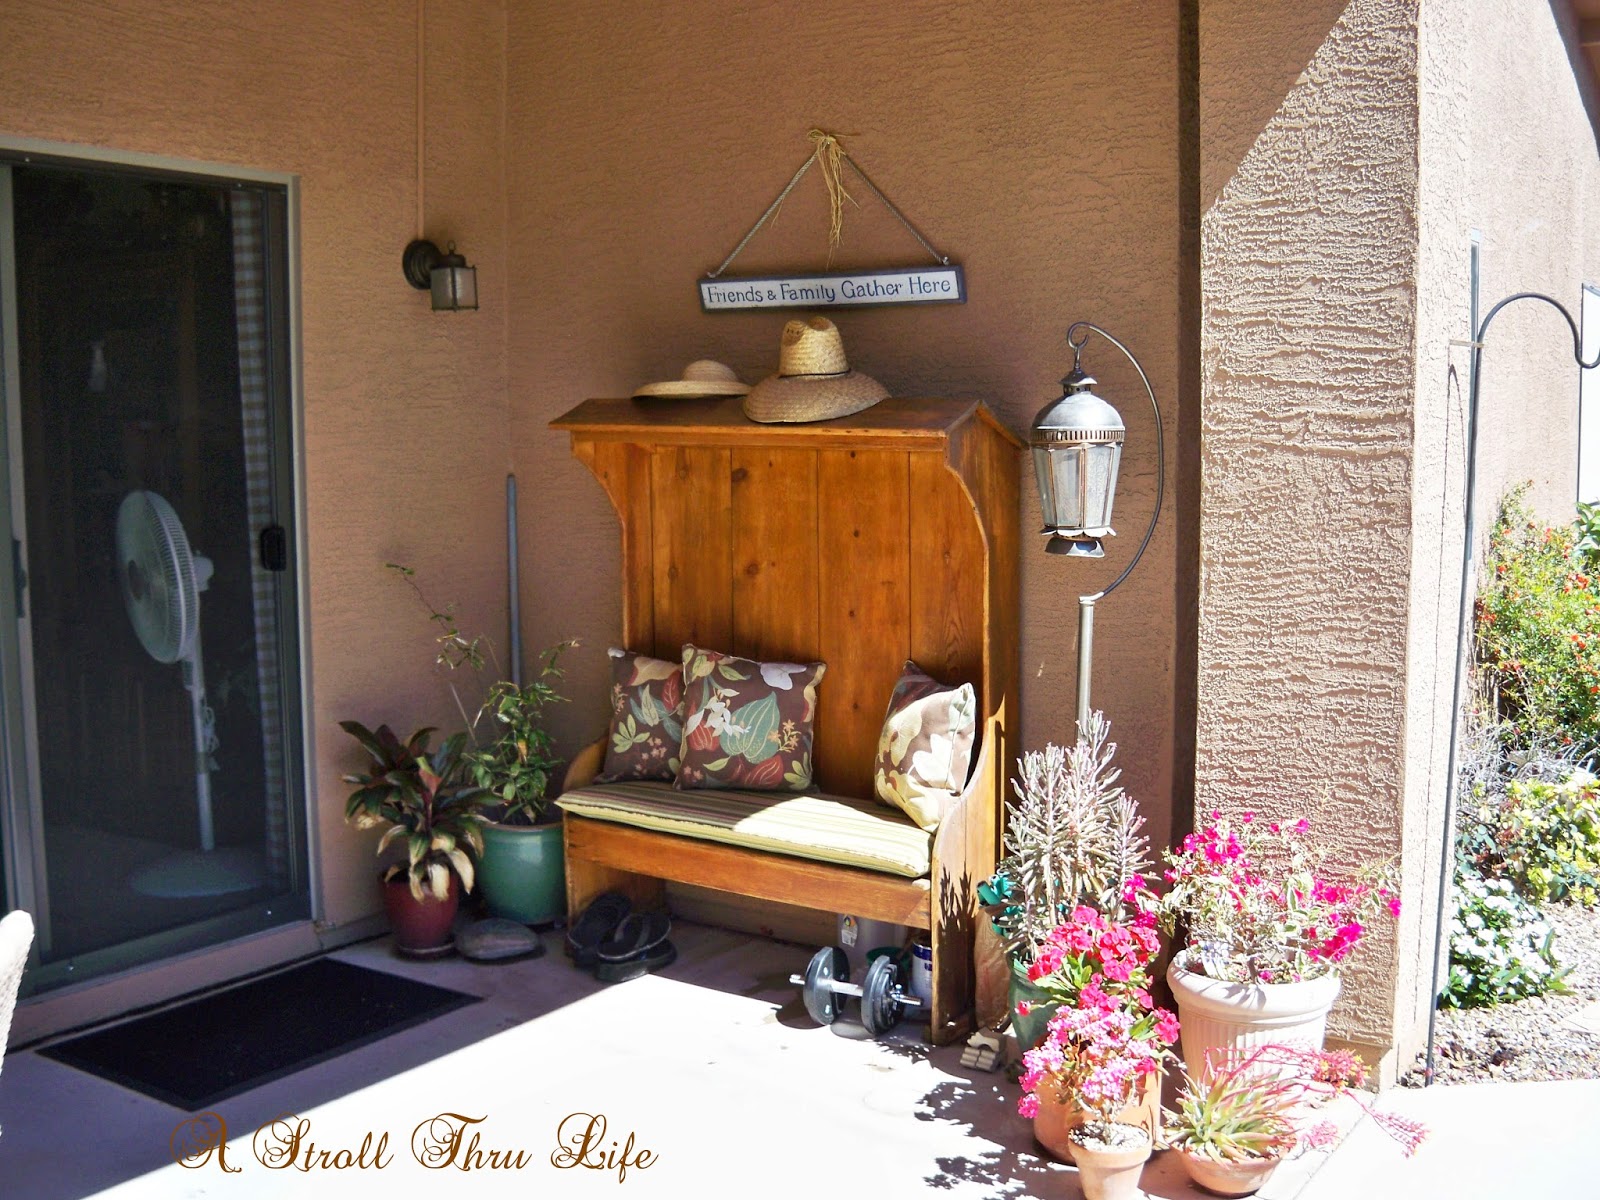 A Stroll Thru Life - Meet Marty at The Everyday Home #blogger